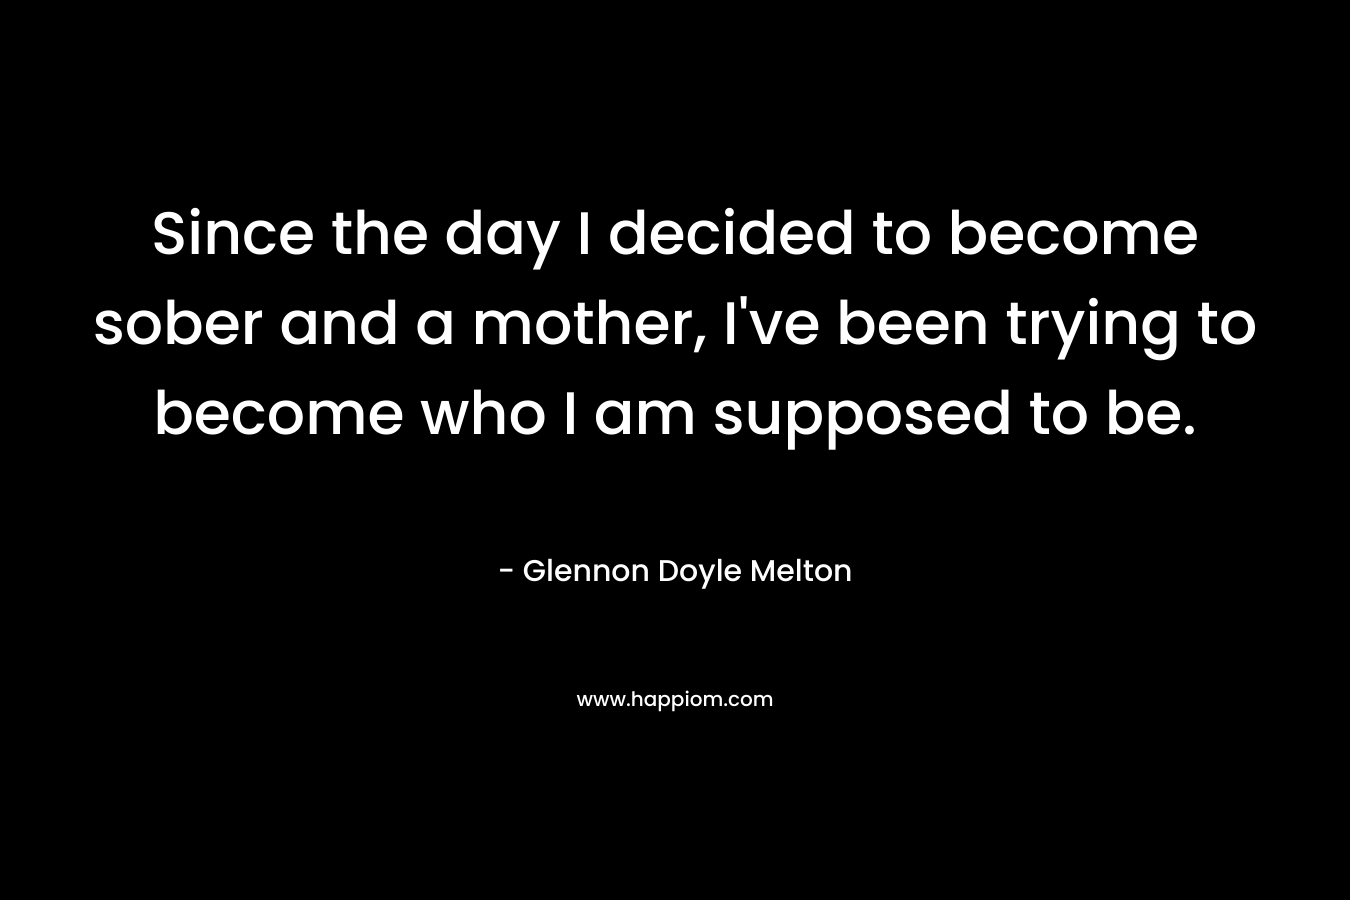 Since the day I decided to become sober and a mother, I've been trying to become who I am supposed to be.